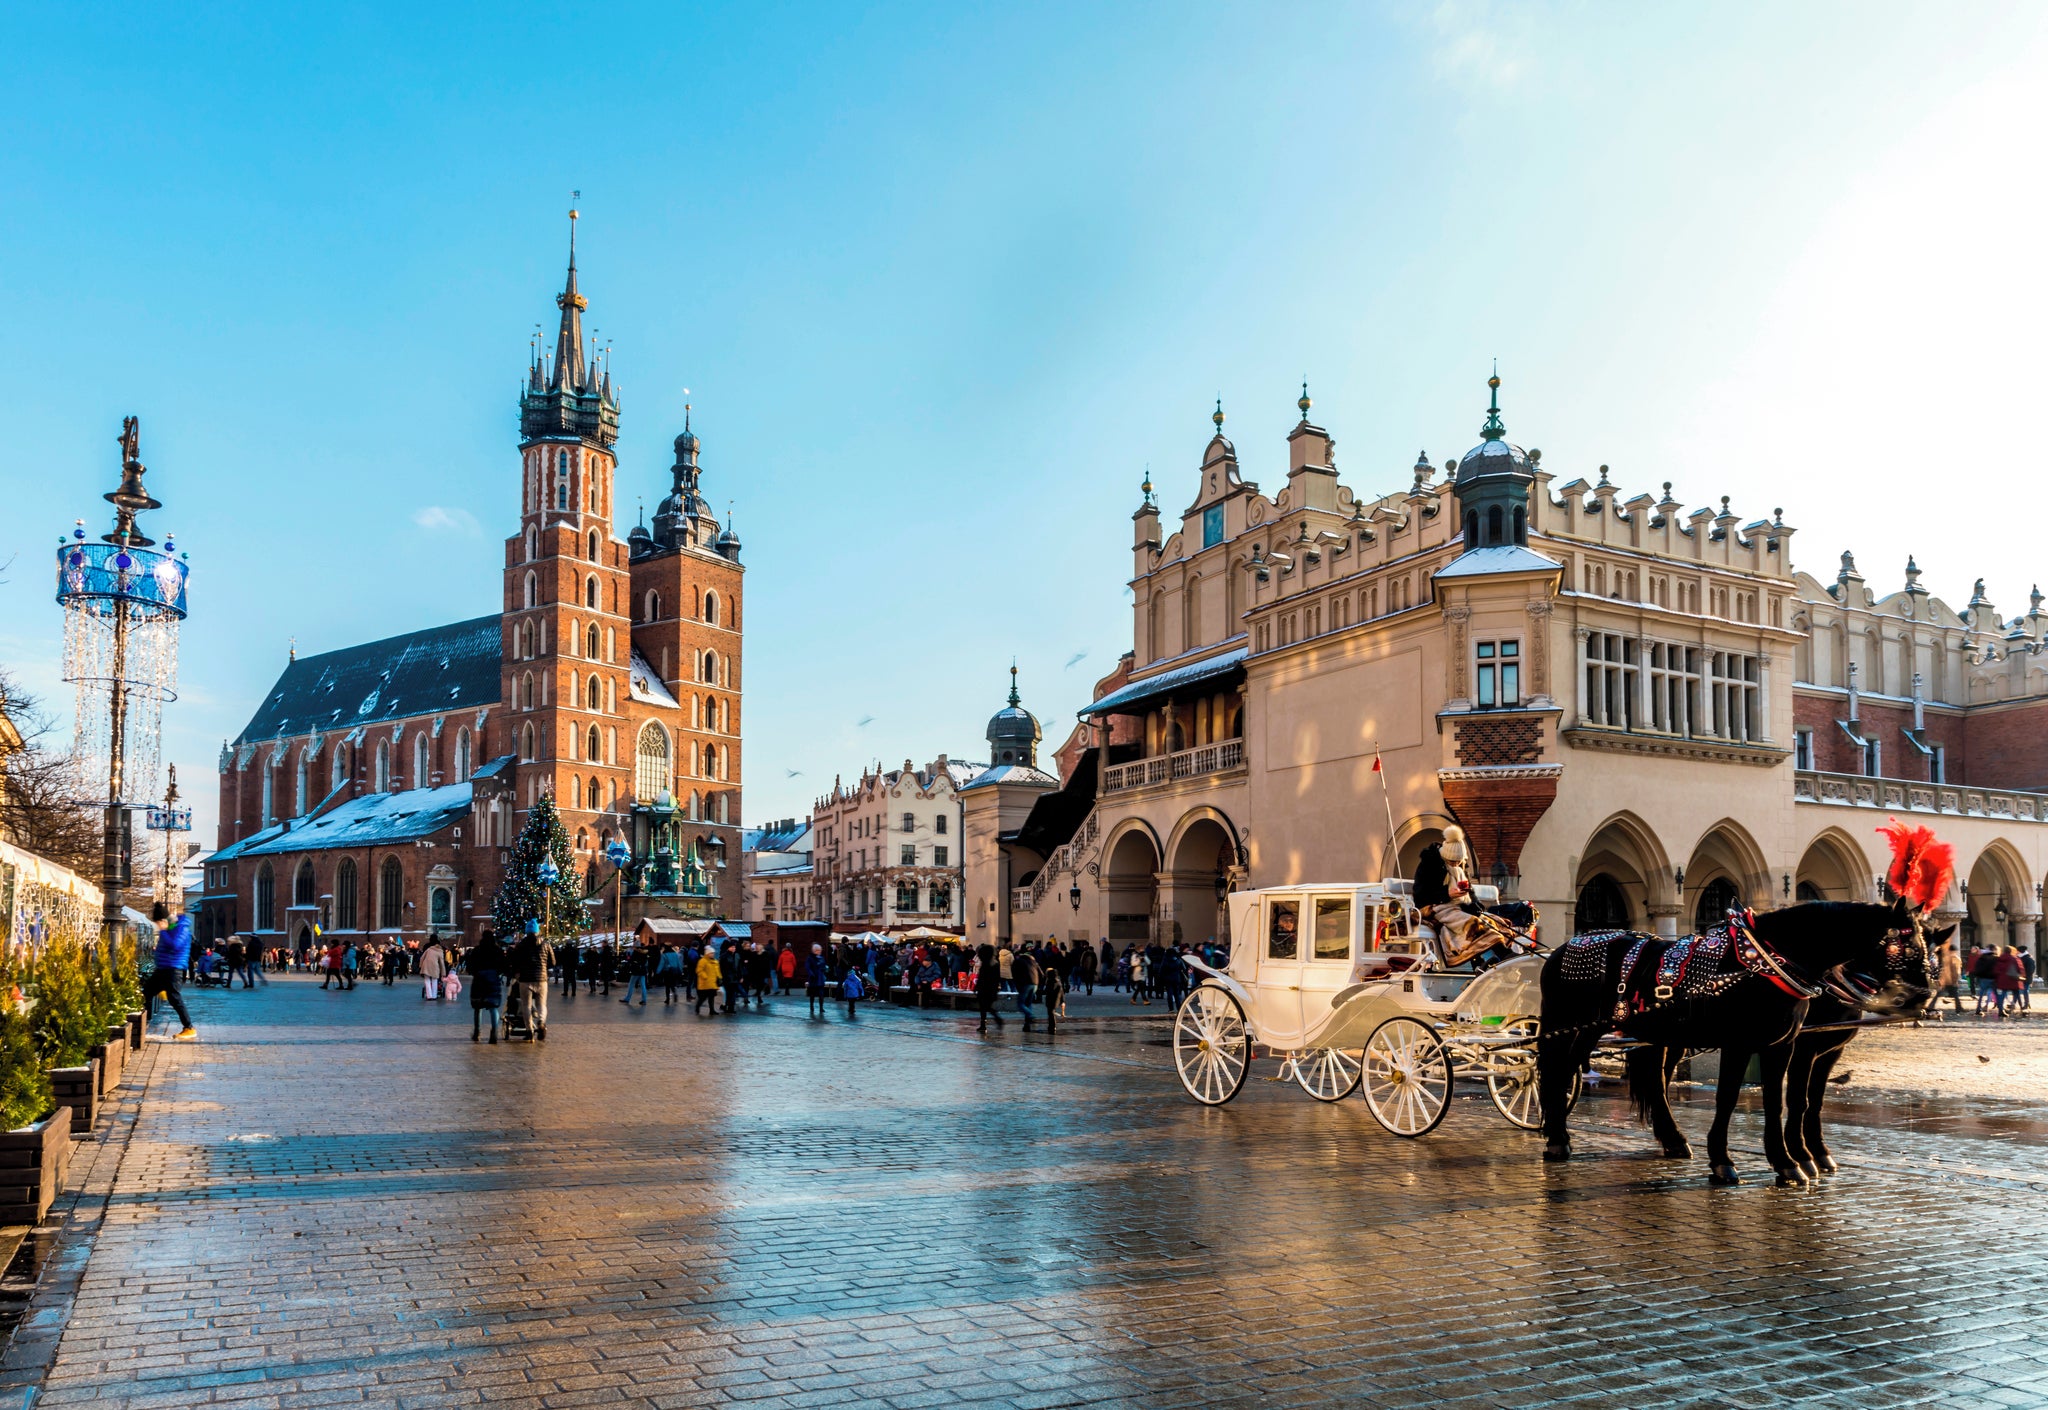 Wander around Krakow’s pretty Old Town and visit the iconic Wawel Cathedral